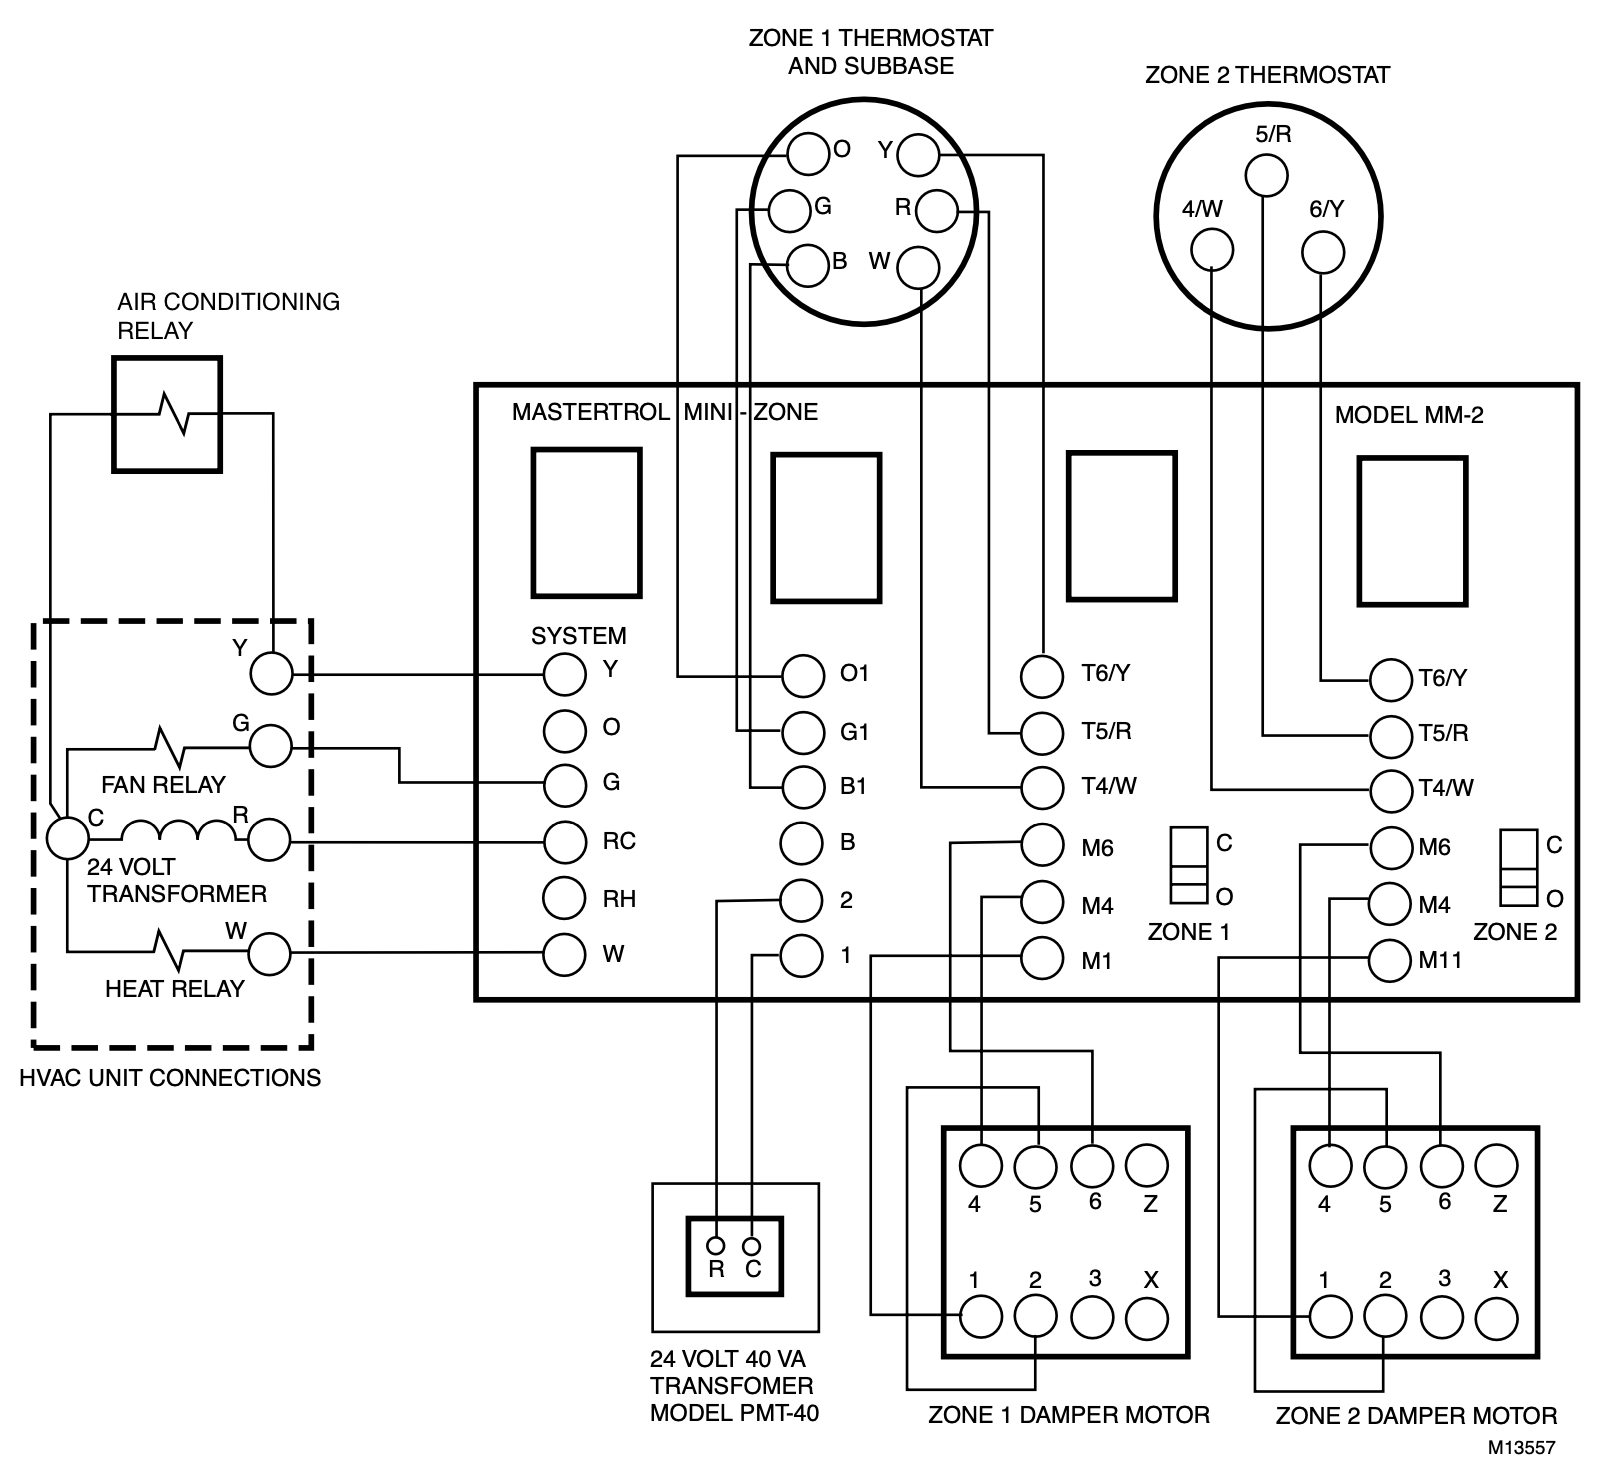 Correct wiring of the old zone controller